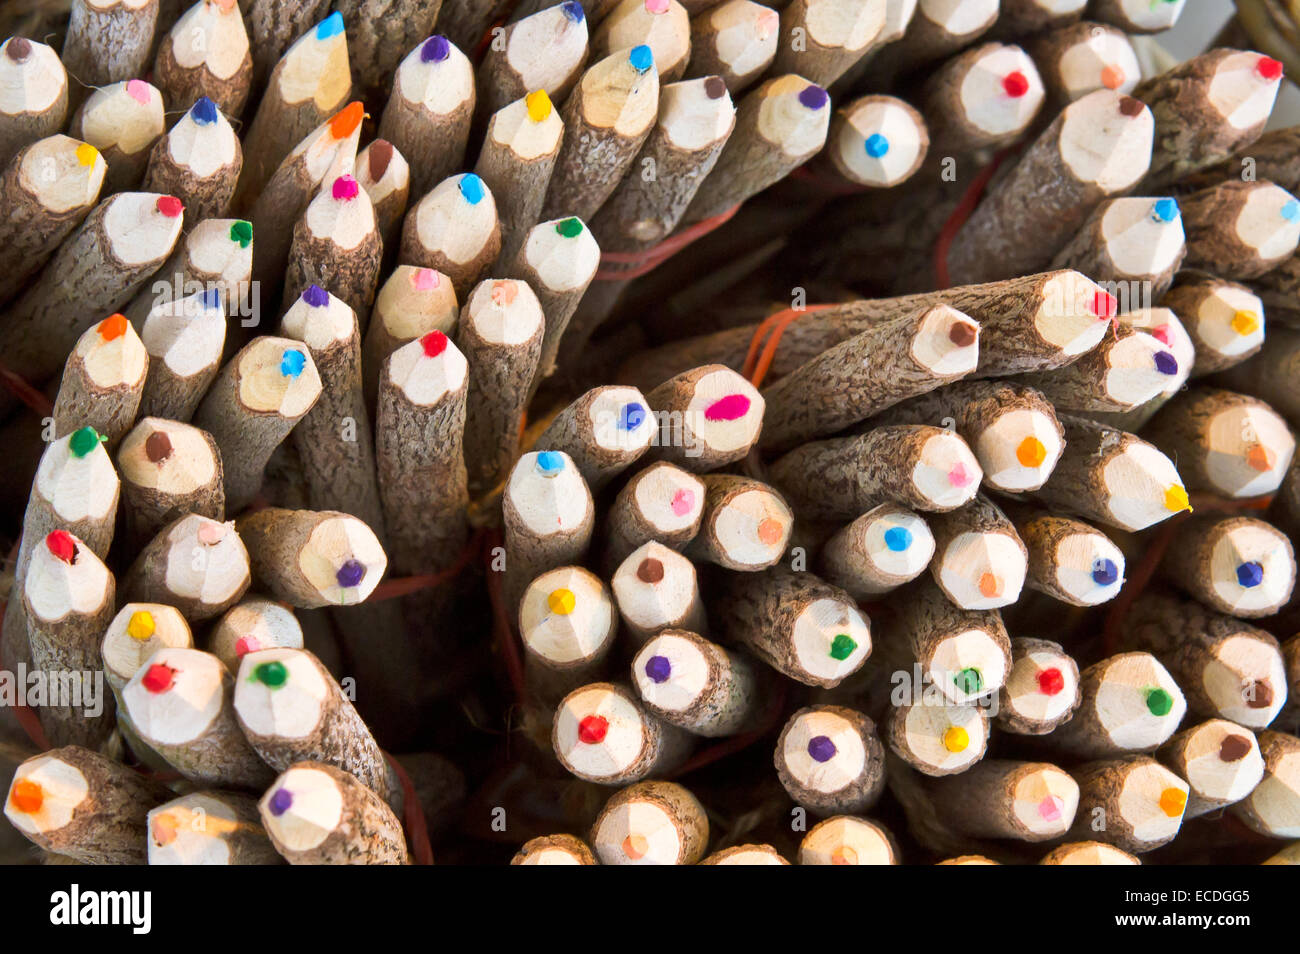 Tips of colorful pencils as a background image Stock Photo